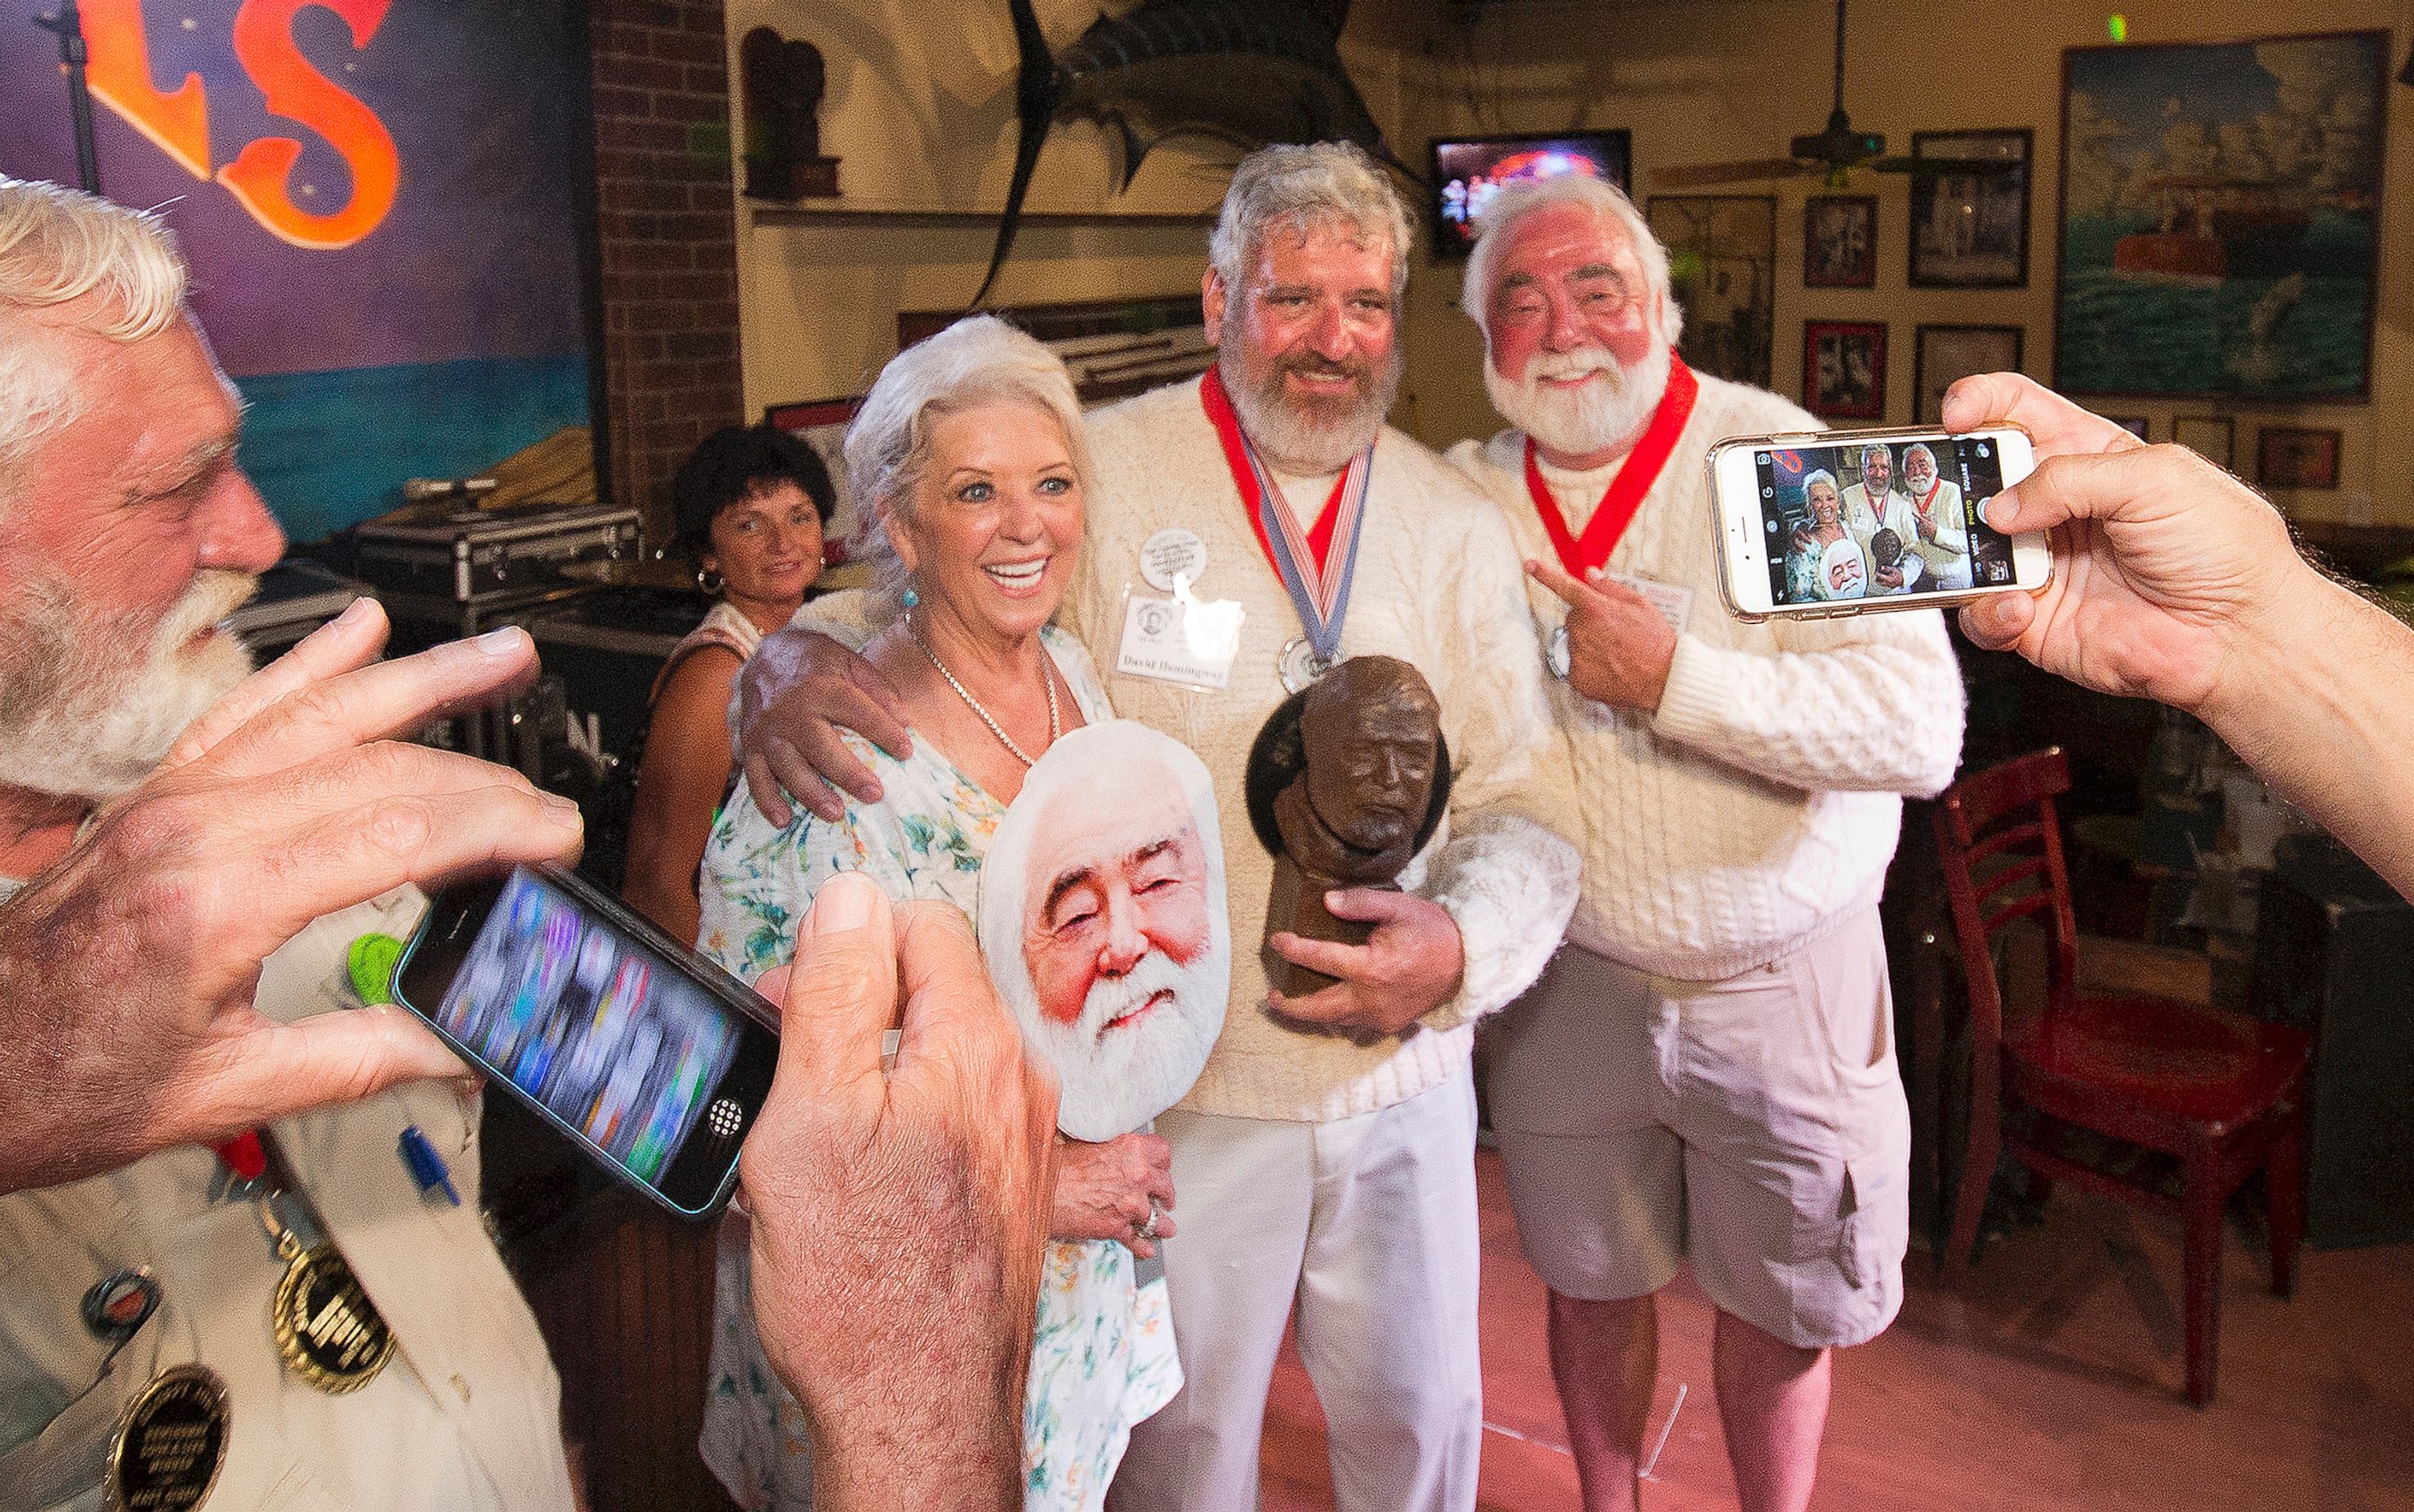 PHOTO: Dave Hemingway, poses for smartphone photos with celebrity chef Paula Deen and her husband Michael Groover, after Dave Hemingway won the 2016 Ernest "Papa"  Hemingway Look-Alike Contest at Sloppy Joe's Bar in Key West, Florida, July 23, 2016. 